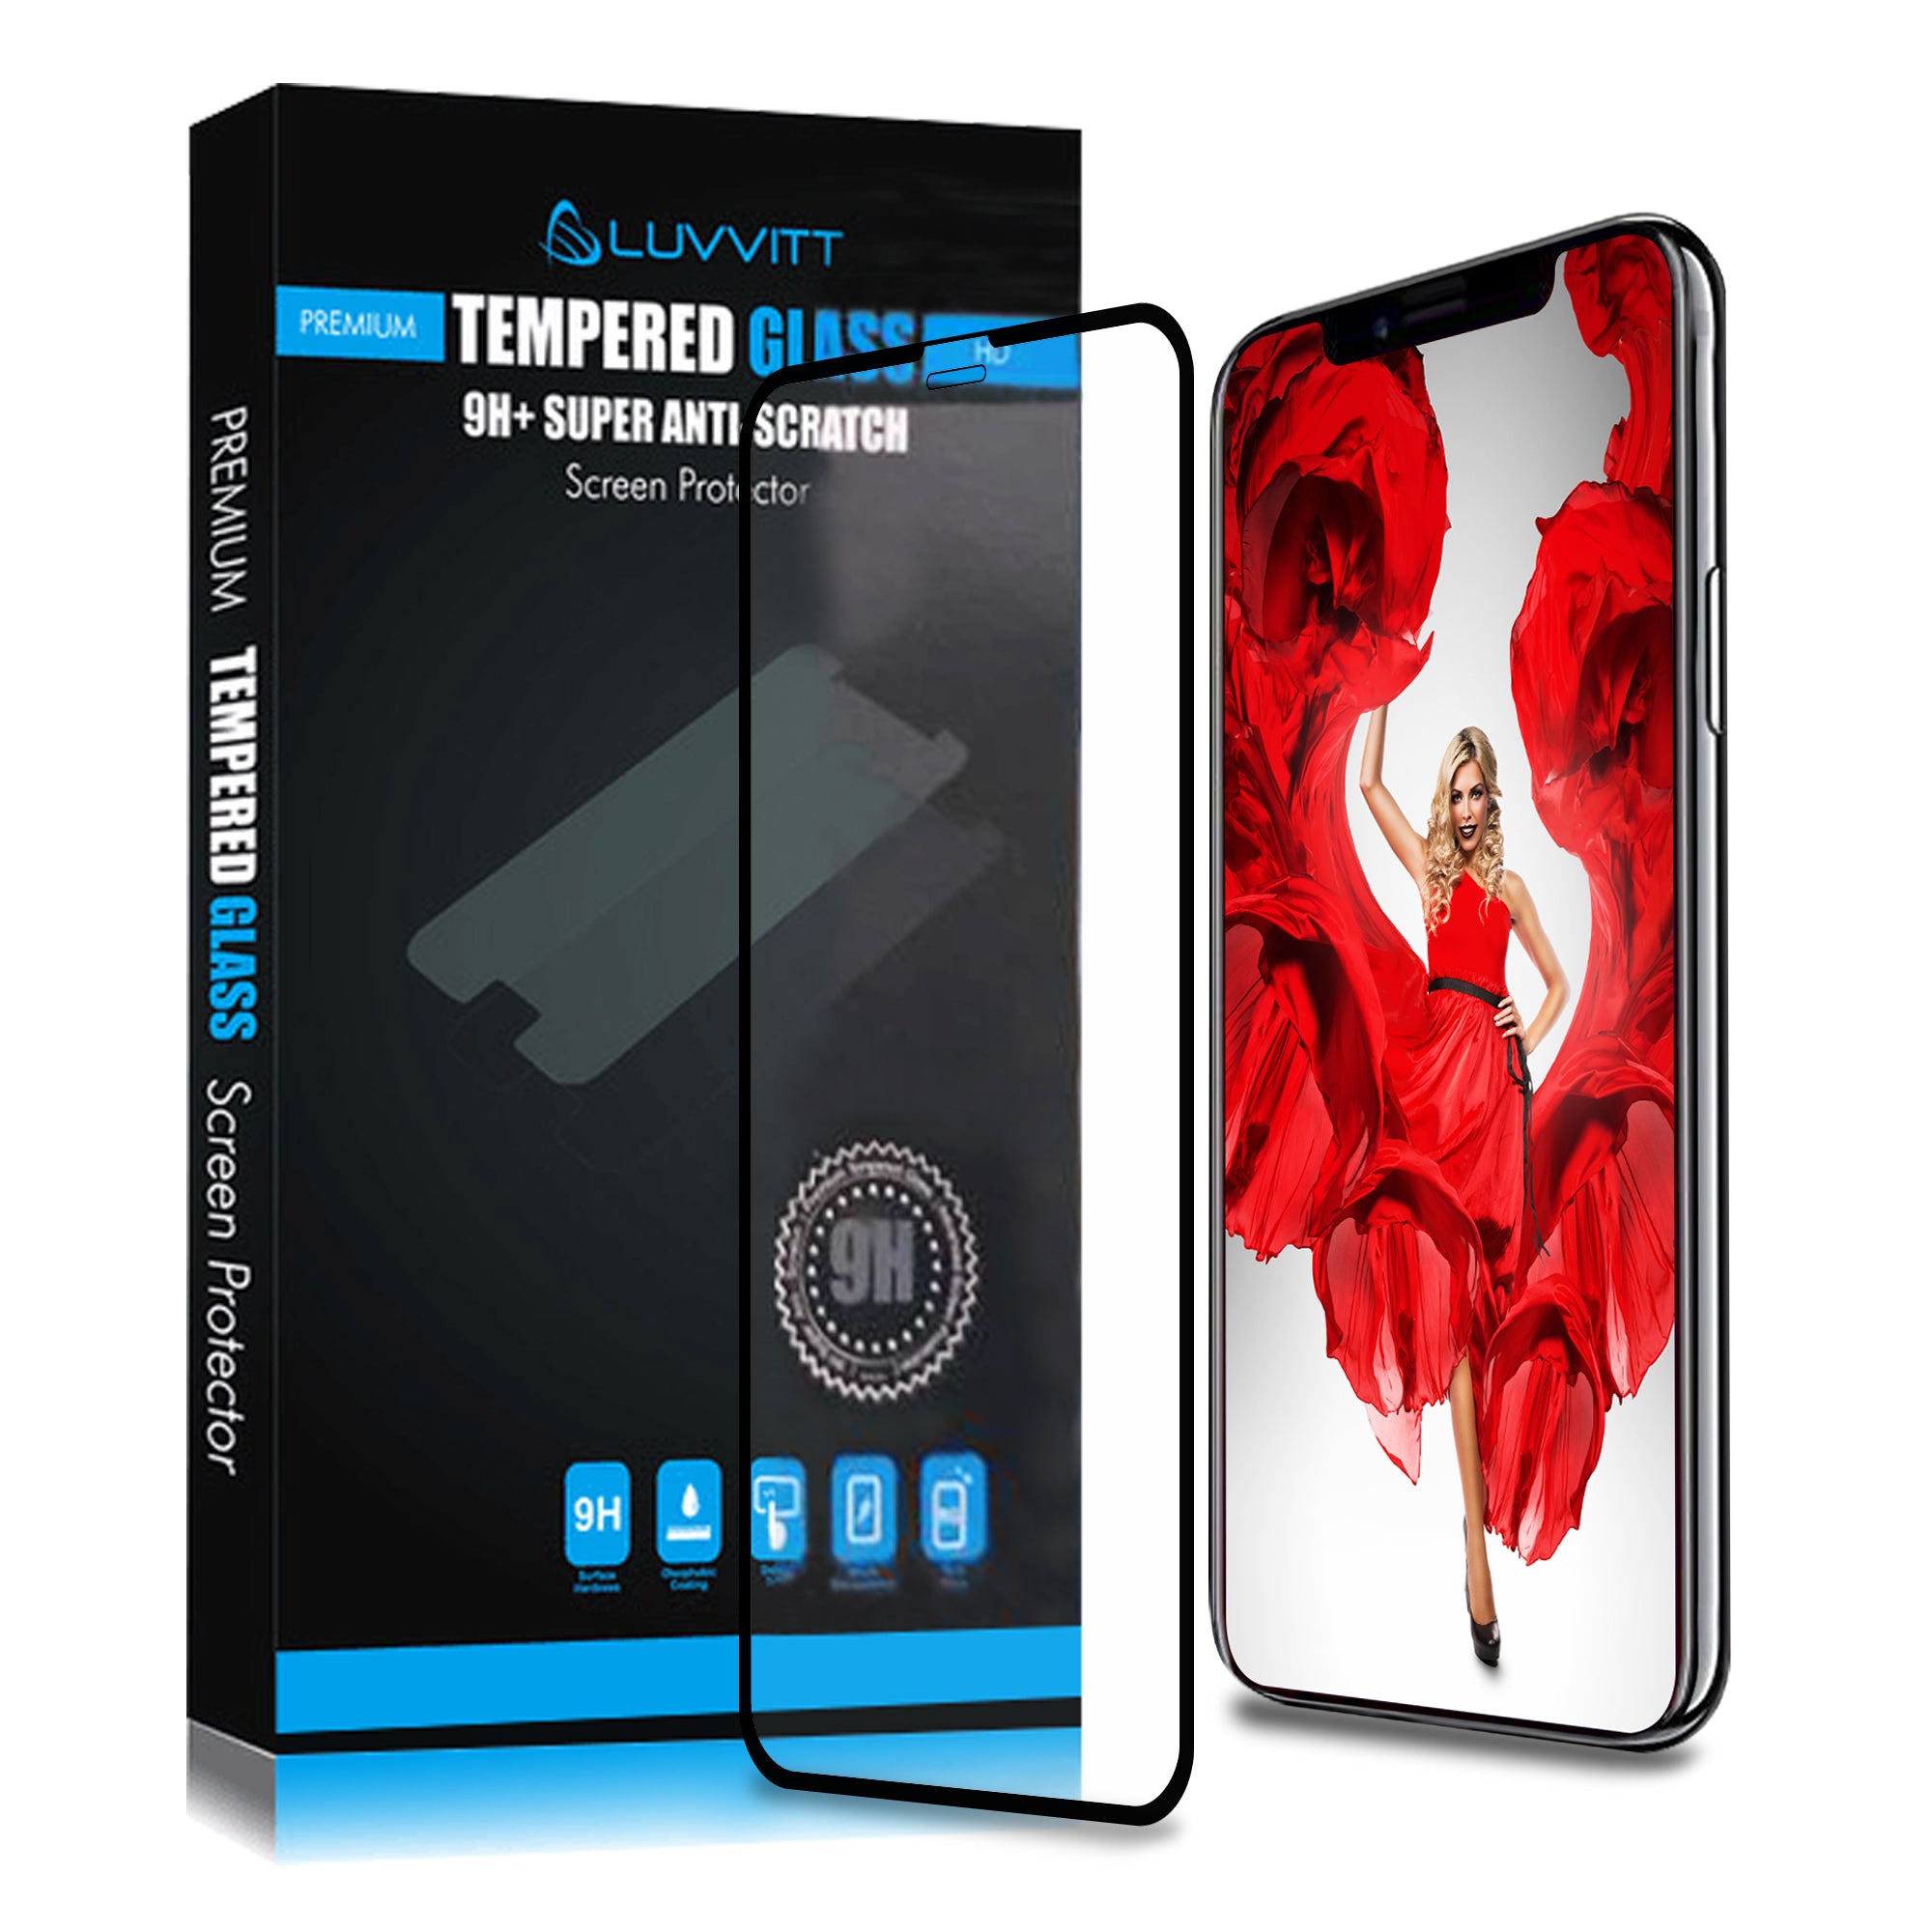 Luvvitt Tempered Glass for iPhone XS Max 6.5 inch Screen 2018